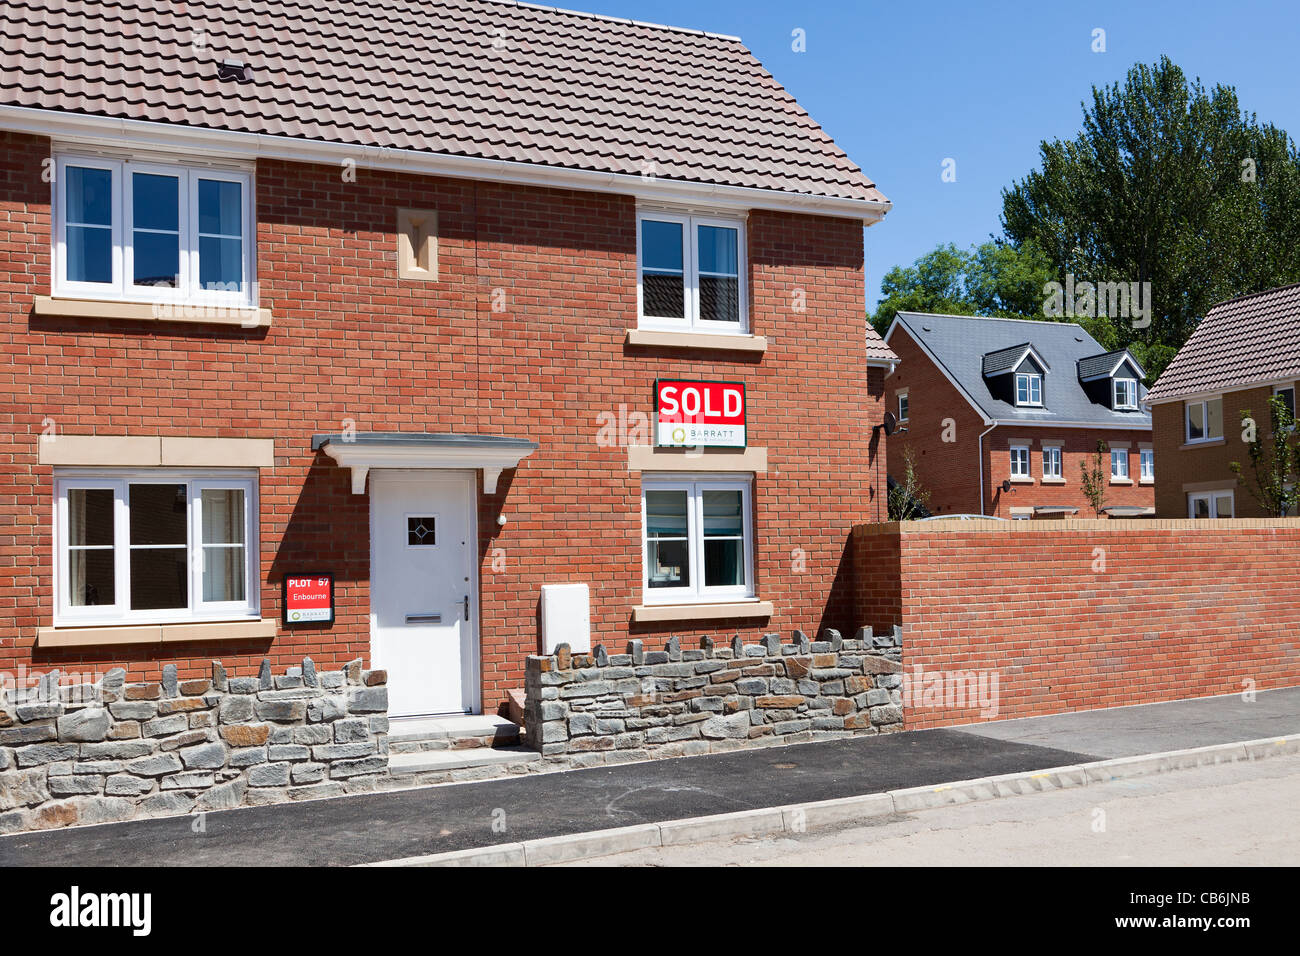 New house with sold sign on new Barratt estate Abergavenny Wales UK Stock Photo